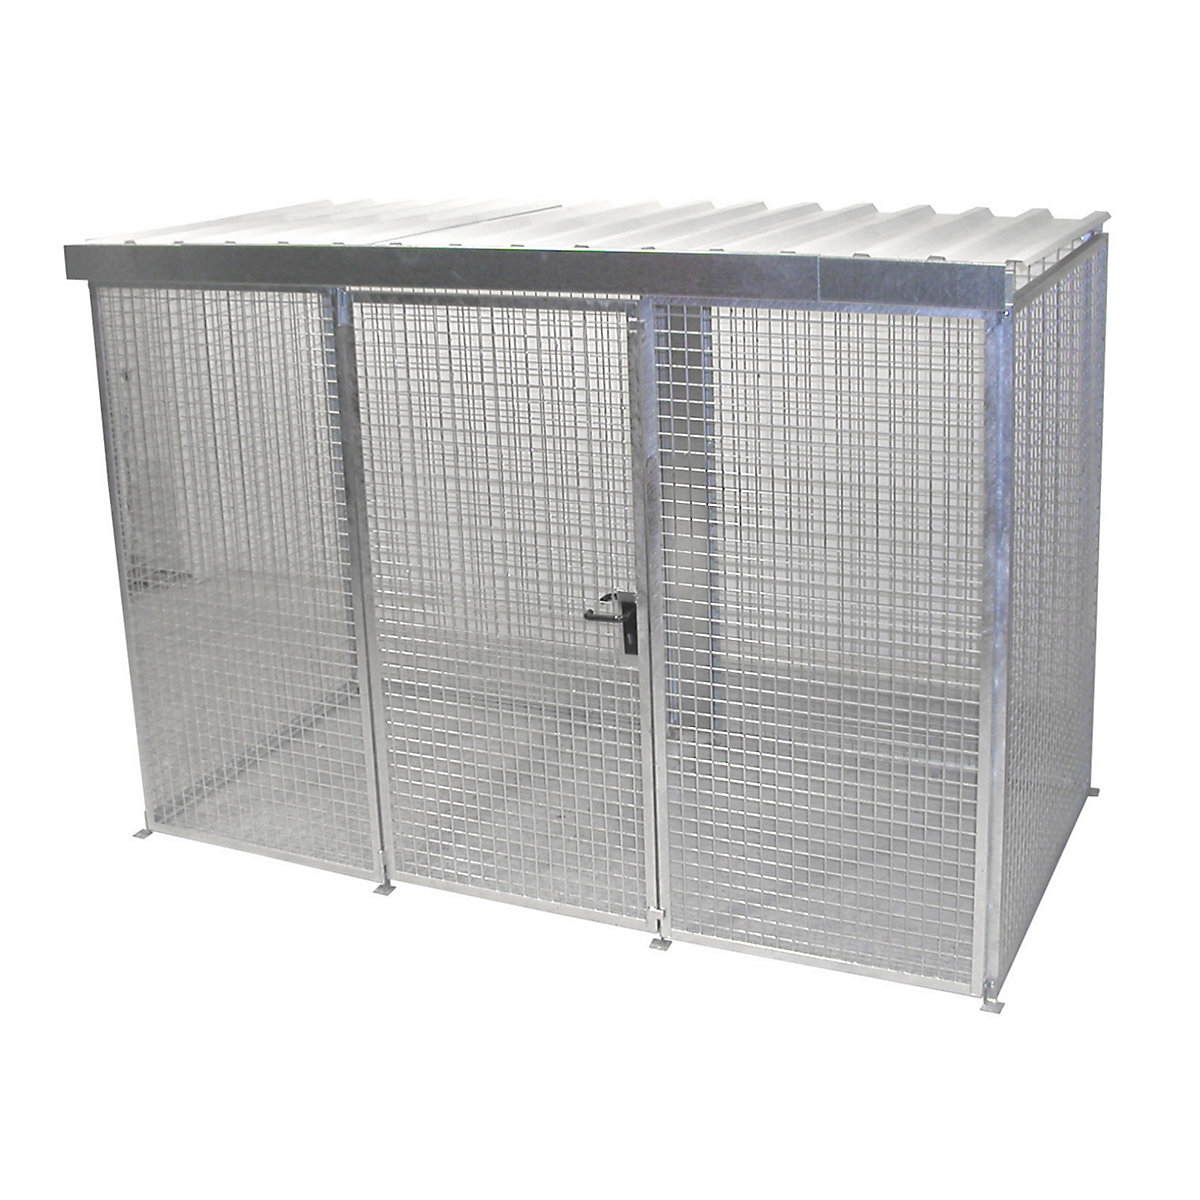 EUROKRAFTpro – Mesh gas cylinder cage, with roof and base disc, WxD 3100 x 1500 mm